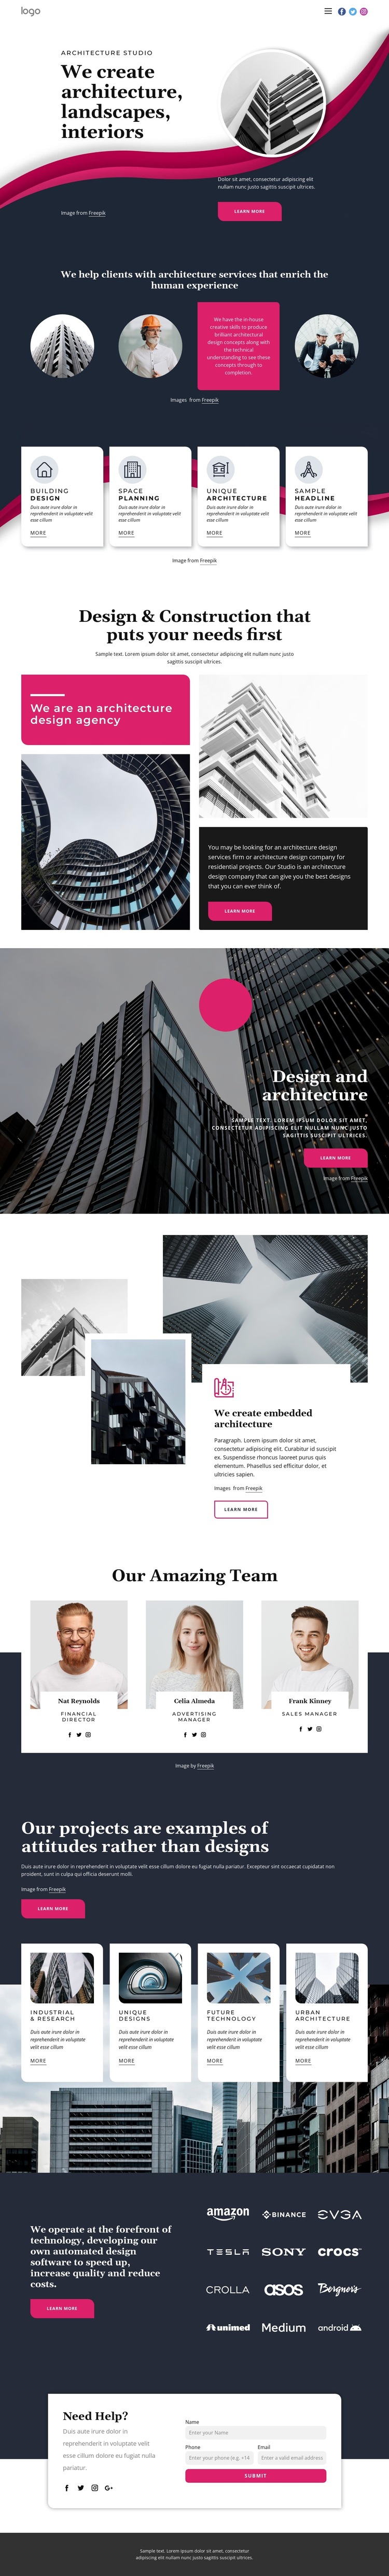 We create great architecture HTML5 Template